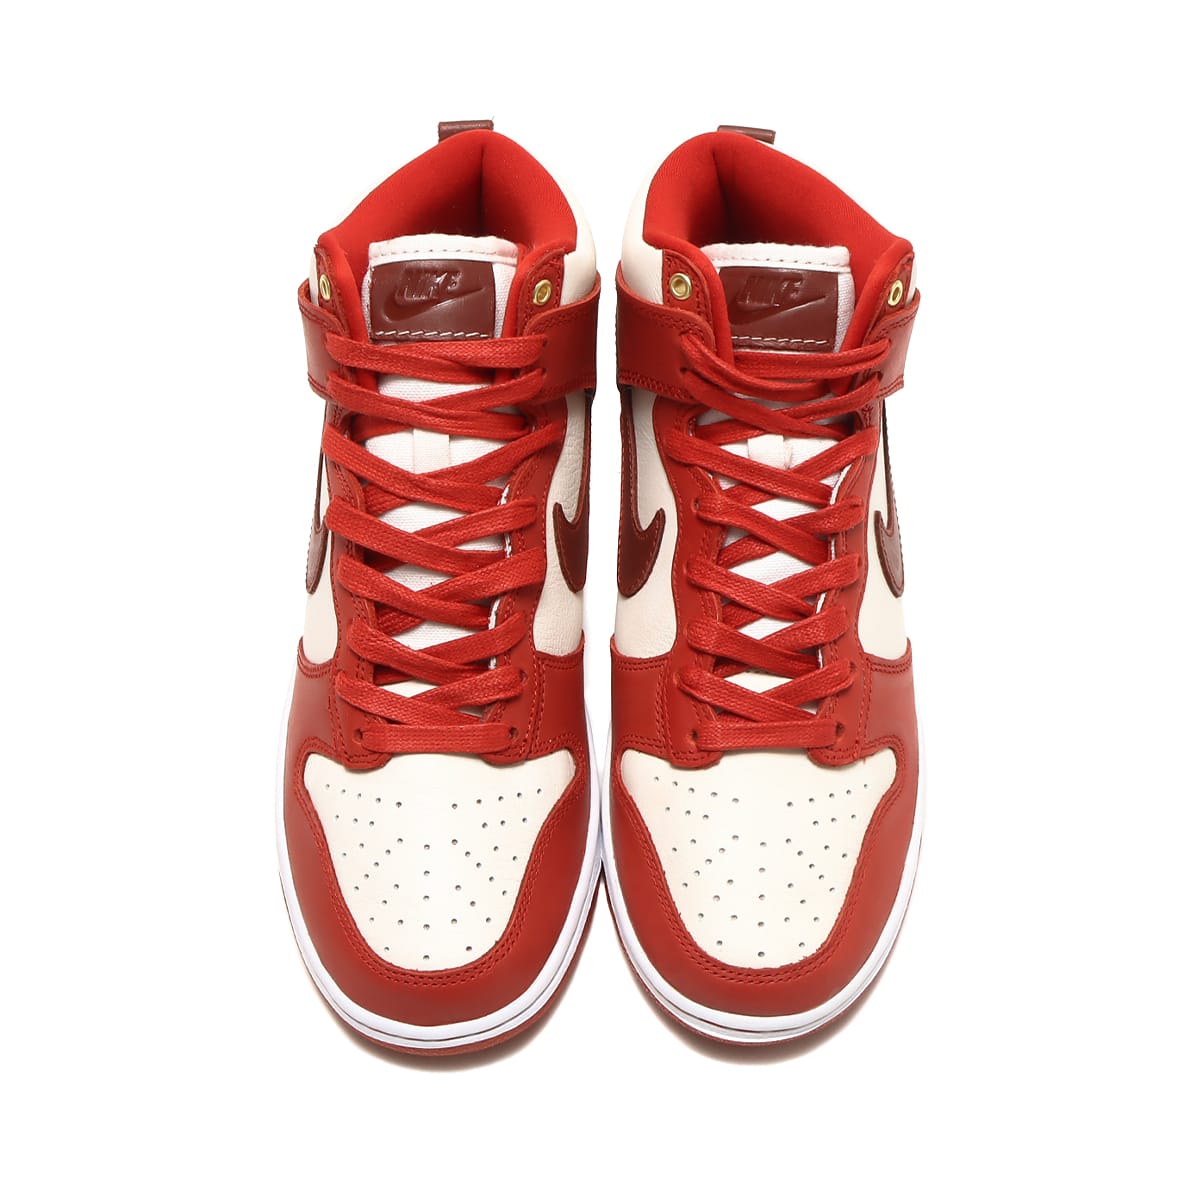 NIKE DUNK HIGH GUM RED-SAIL レザー キャンパス